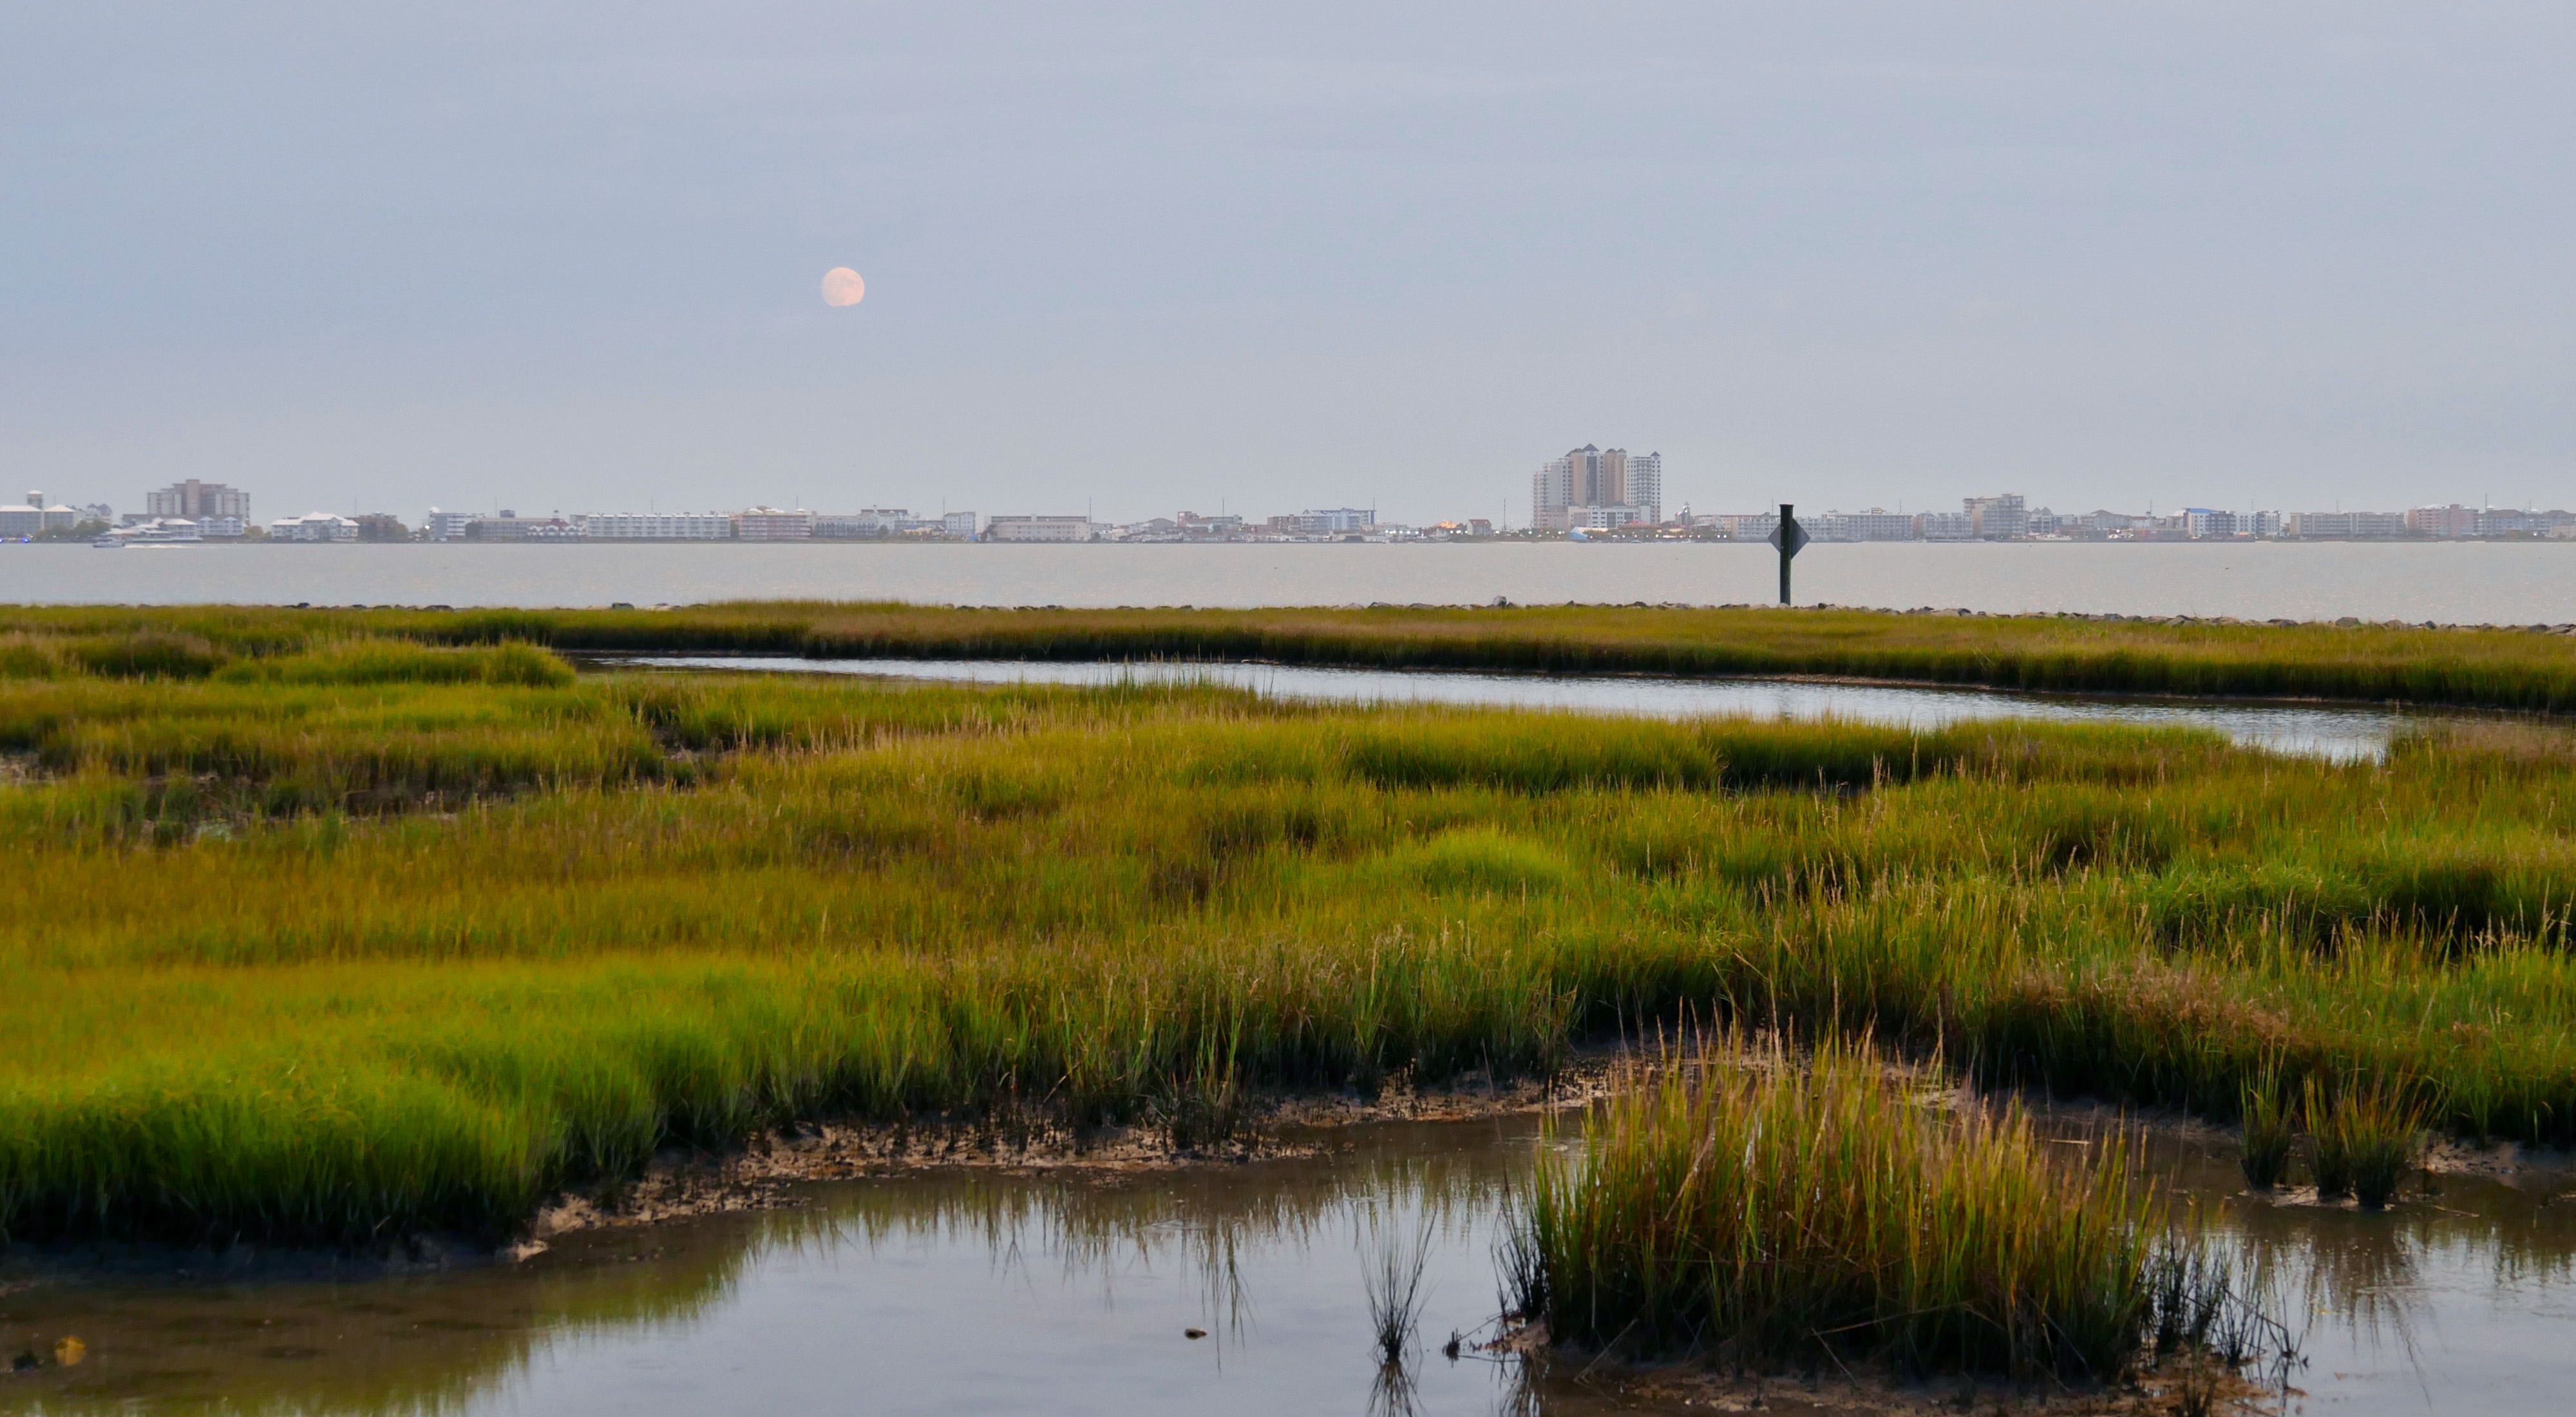 View of the Ocean City Maryland skyline. The buildings line the skyline in the distance across an open body of water. Green marshes cut by meandering channels of water are in the foreground.